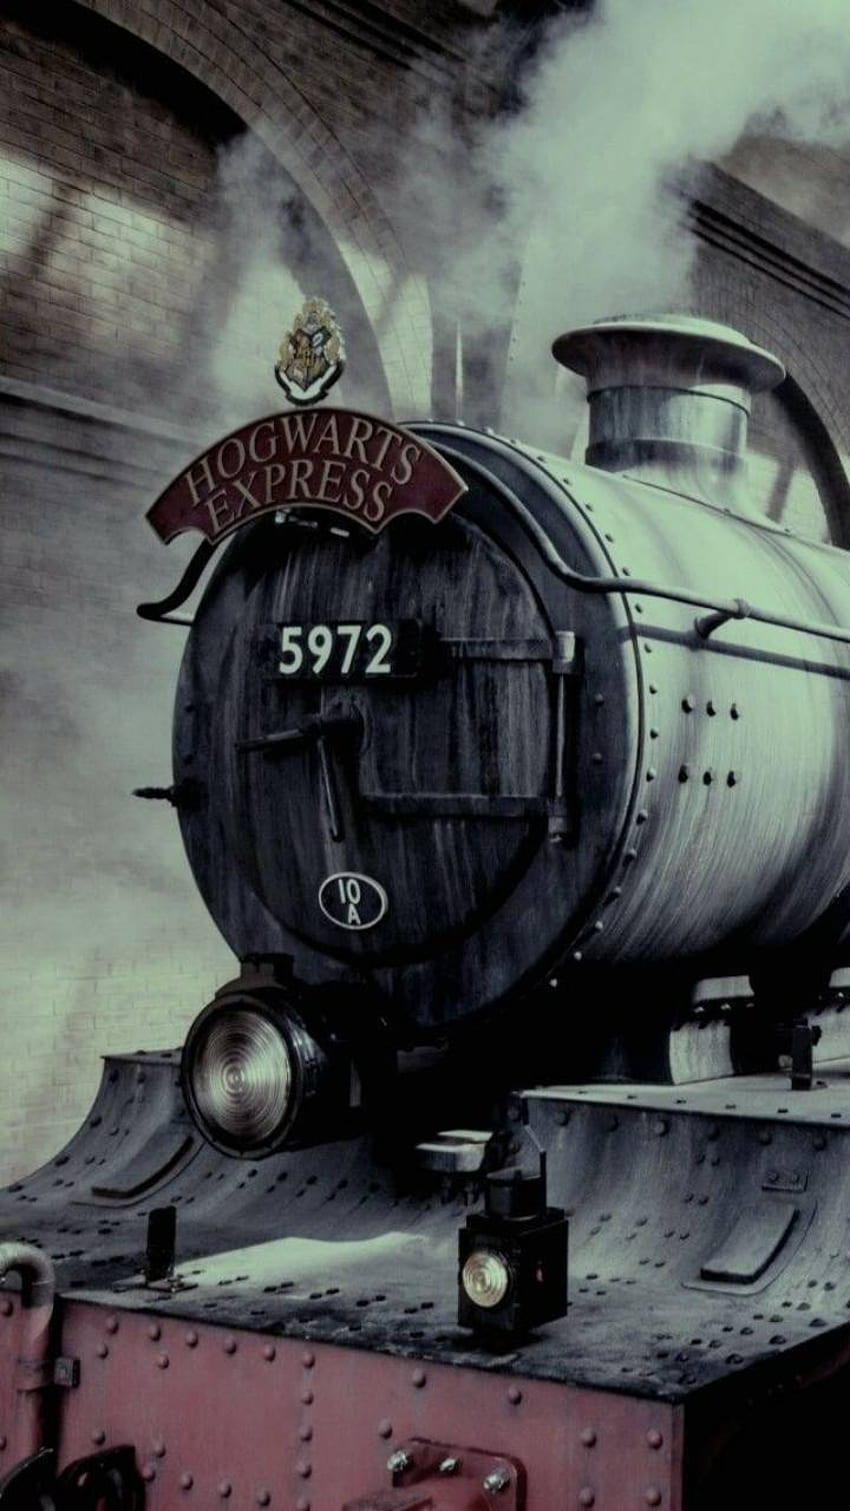 100+] The Hogwarts Express Train Wallpapers | Wallpapers.com